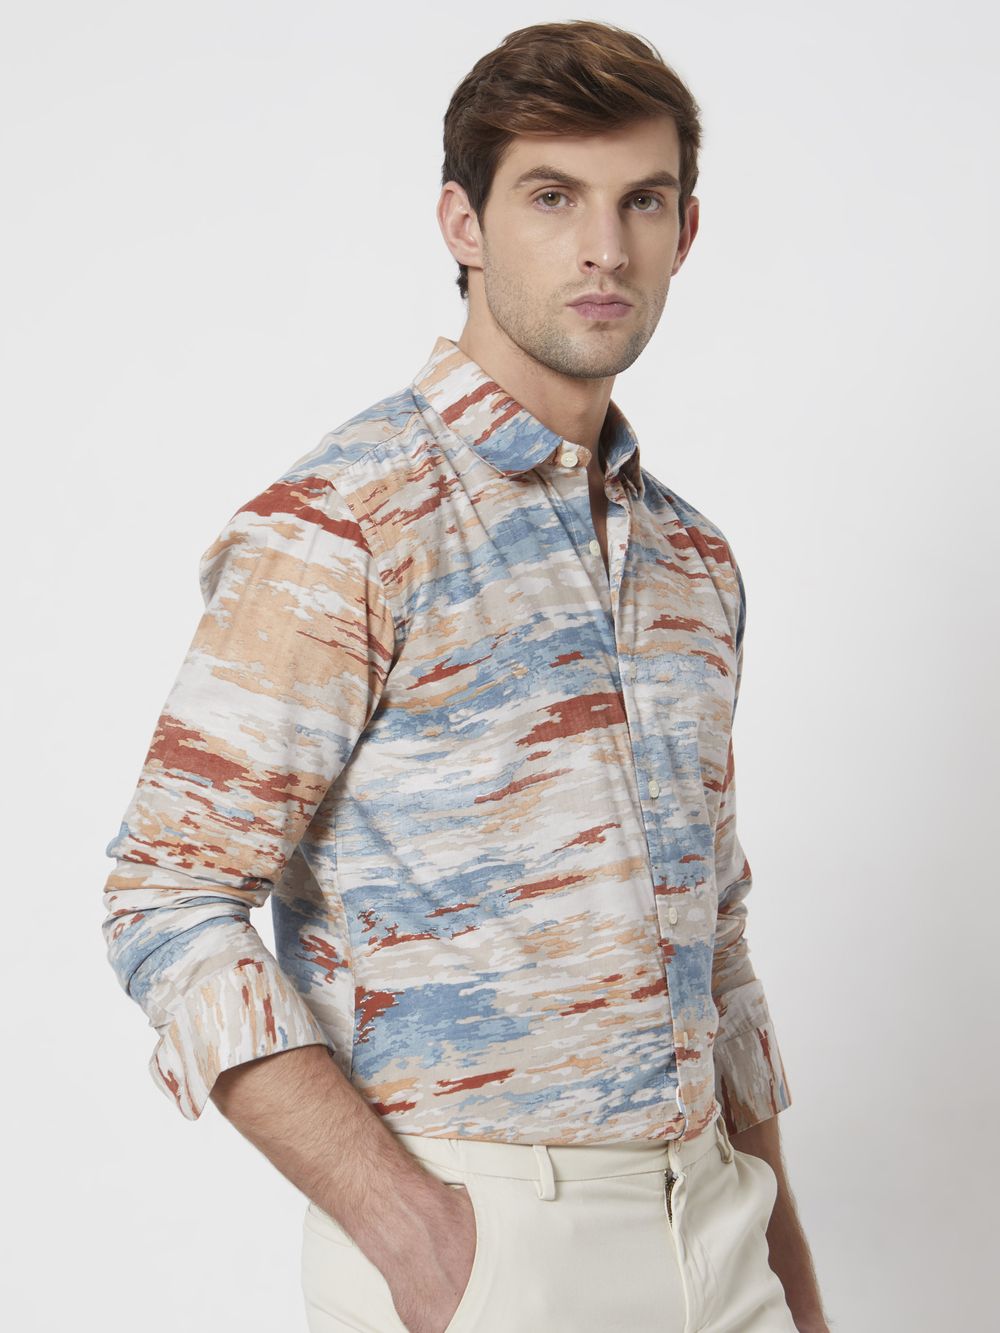 Multi Abstract Cloud Print Slim Fit Casual Shirt